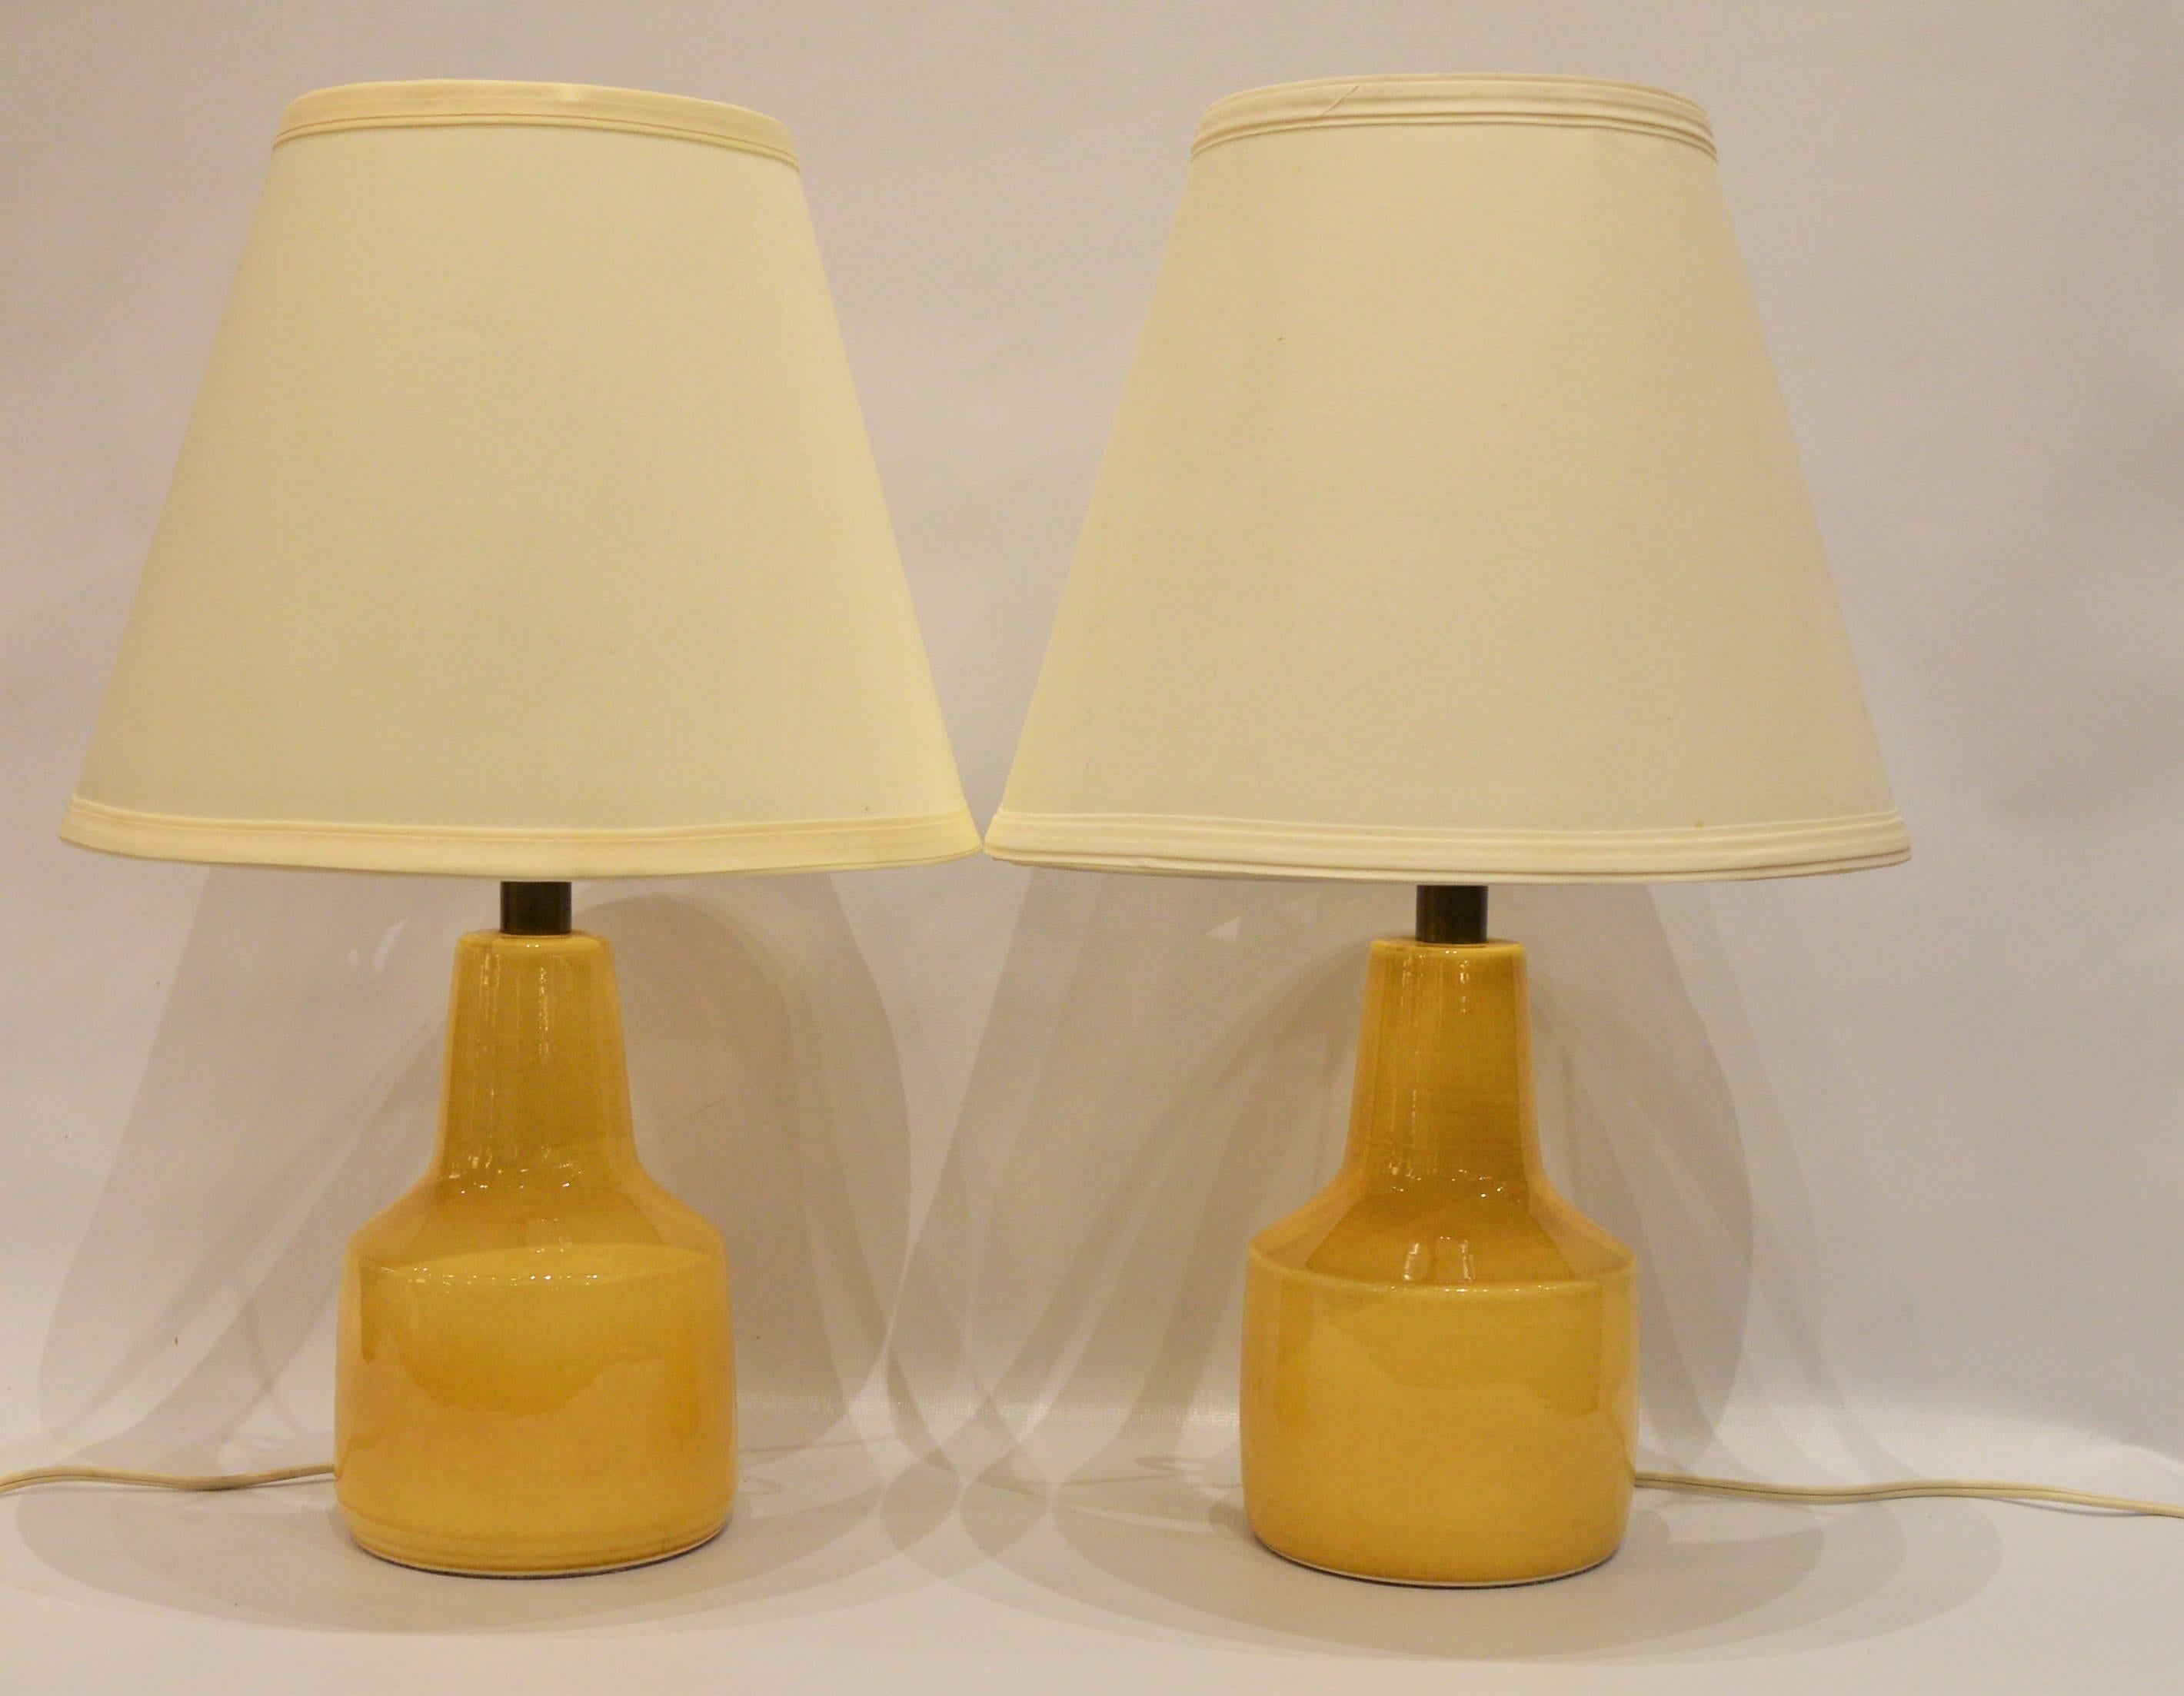 This lovely pair of soft yellow compact ceramic lamps were made by Lotte and Gunnar Bostlund and are the perfect size for compact bedside lamps. Paired with conical white/off-white lamp shades, though one has a spot that can be turned to the back.